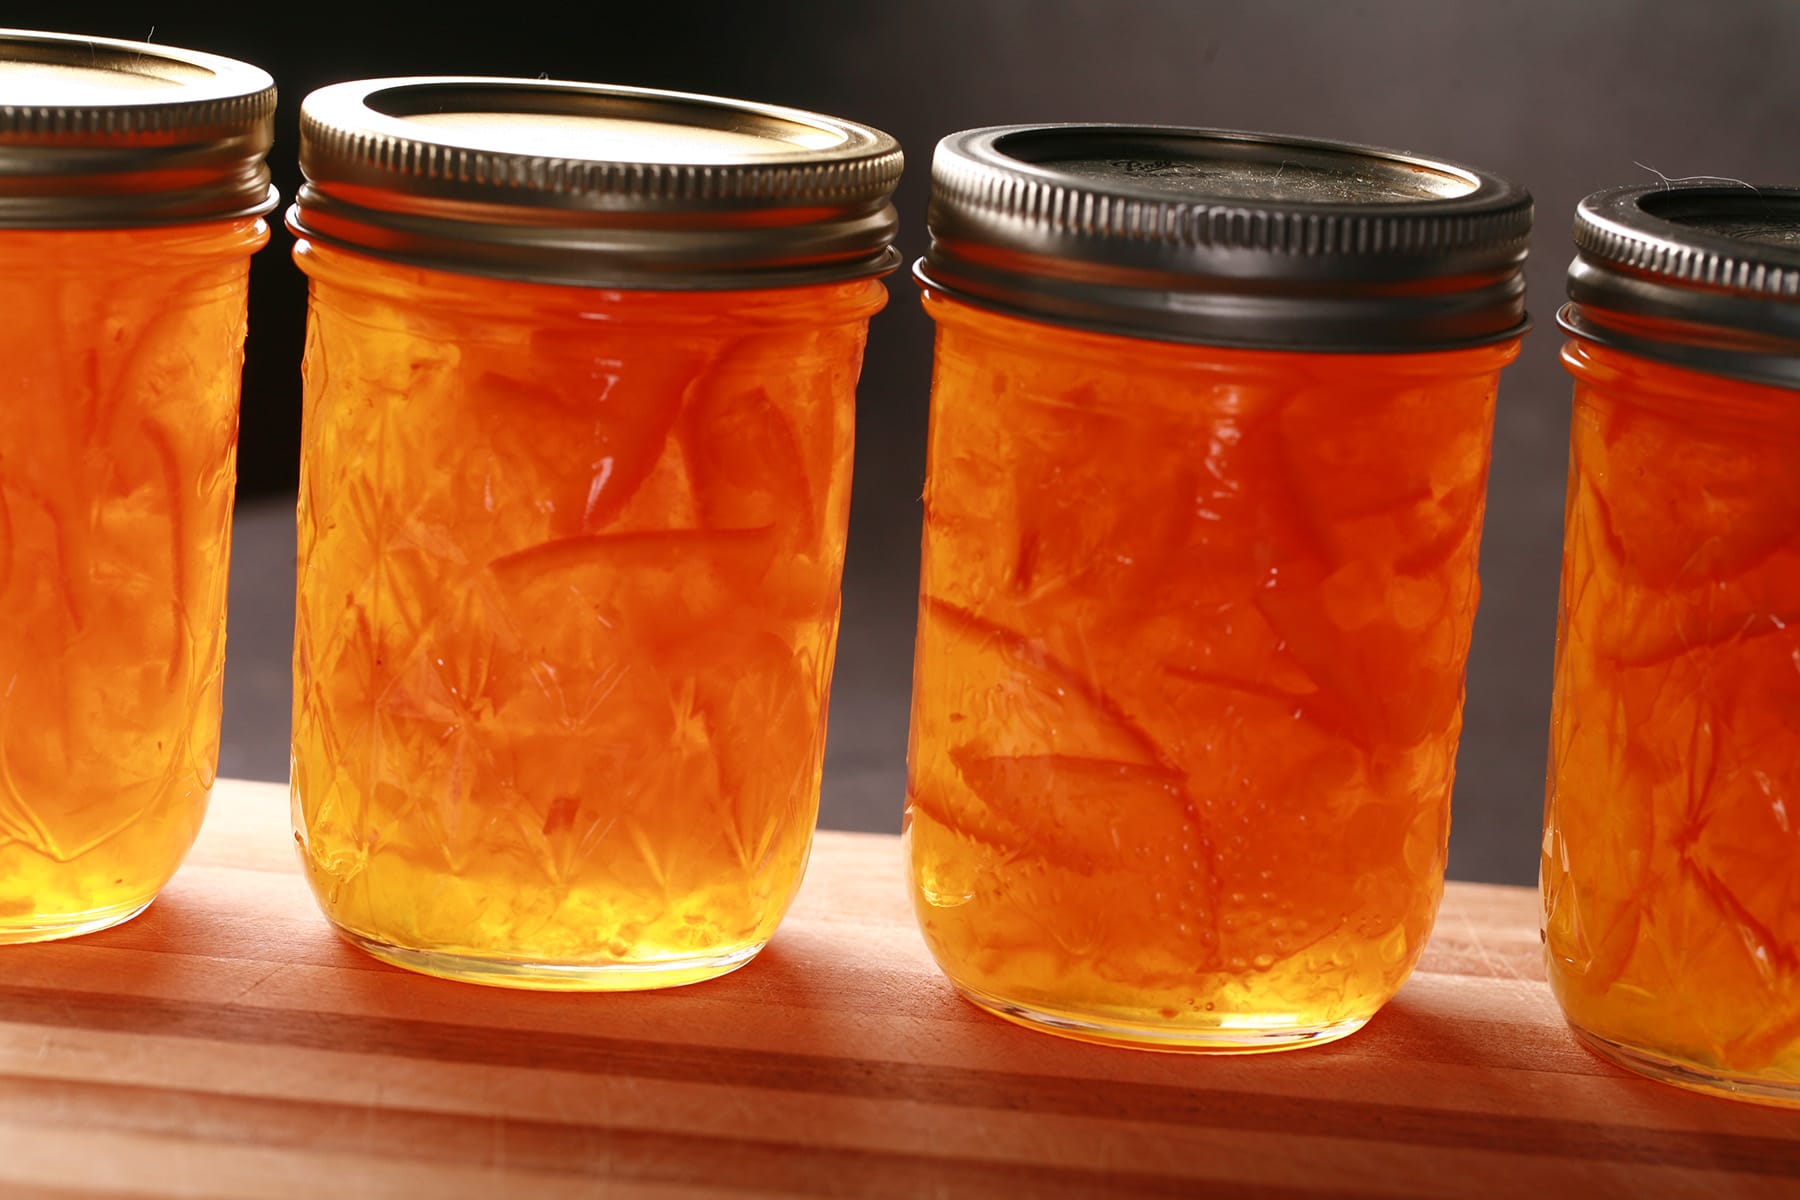 A row of small jars of clementine marmalade.